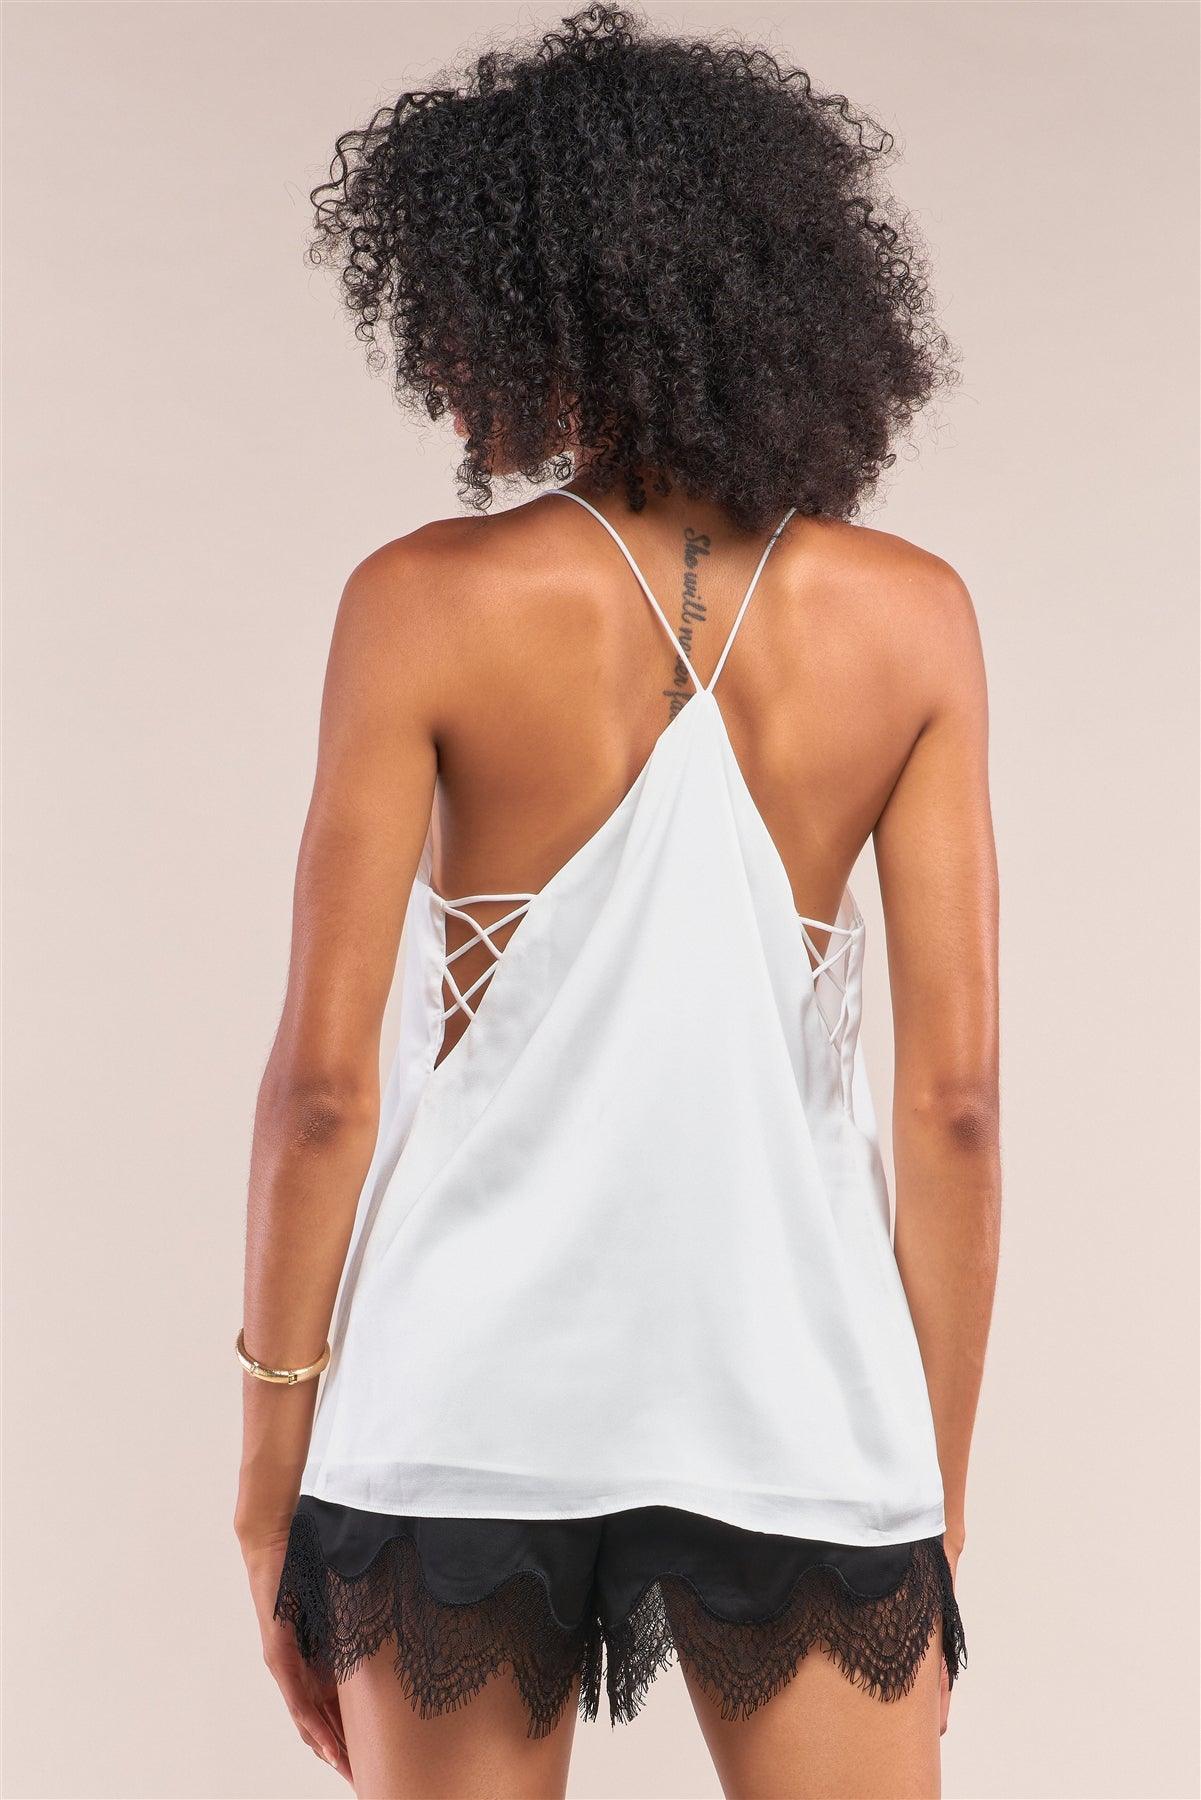 White Sleeveless V-Neck Side Cris Cross Cut-Out Loose Fit Top /1-2-2-1